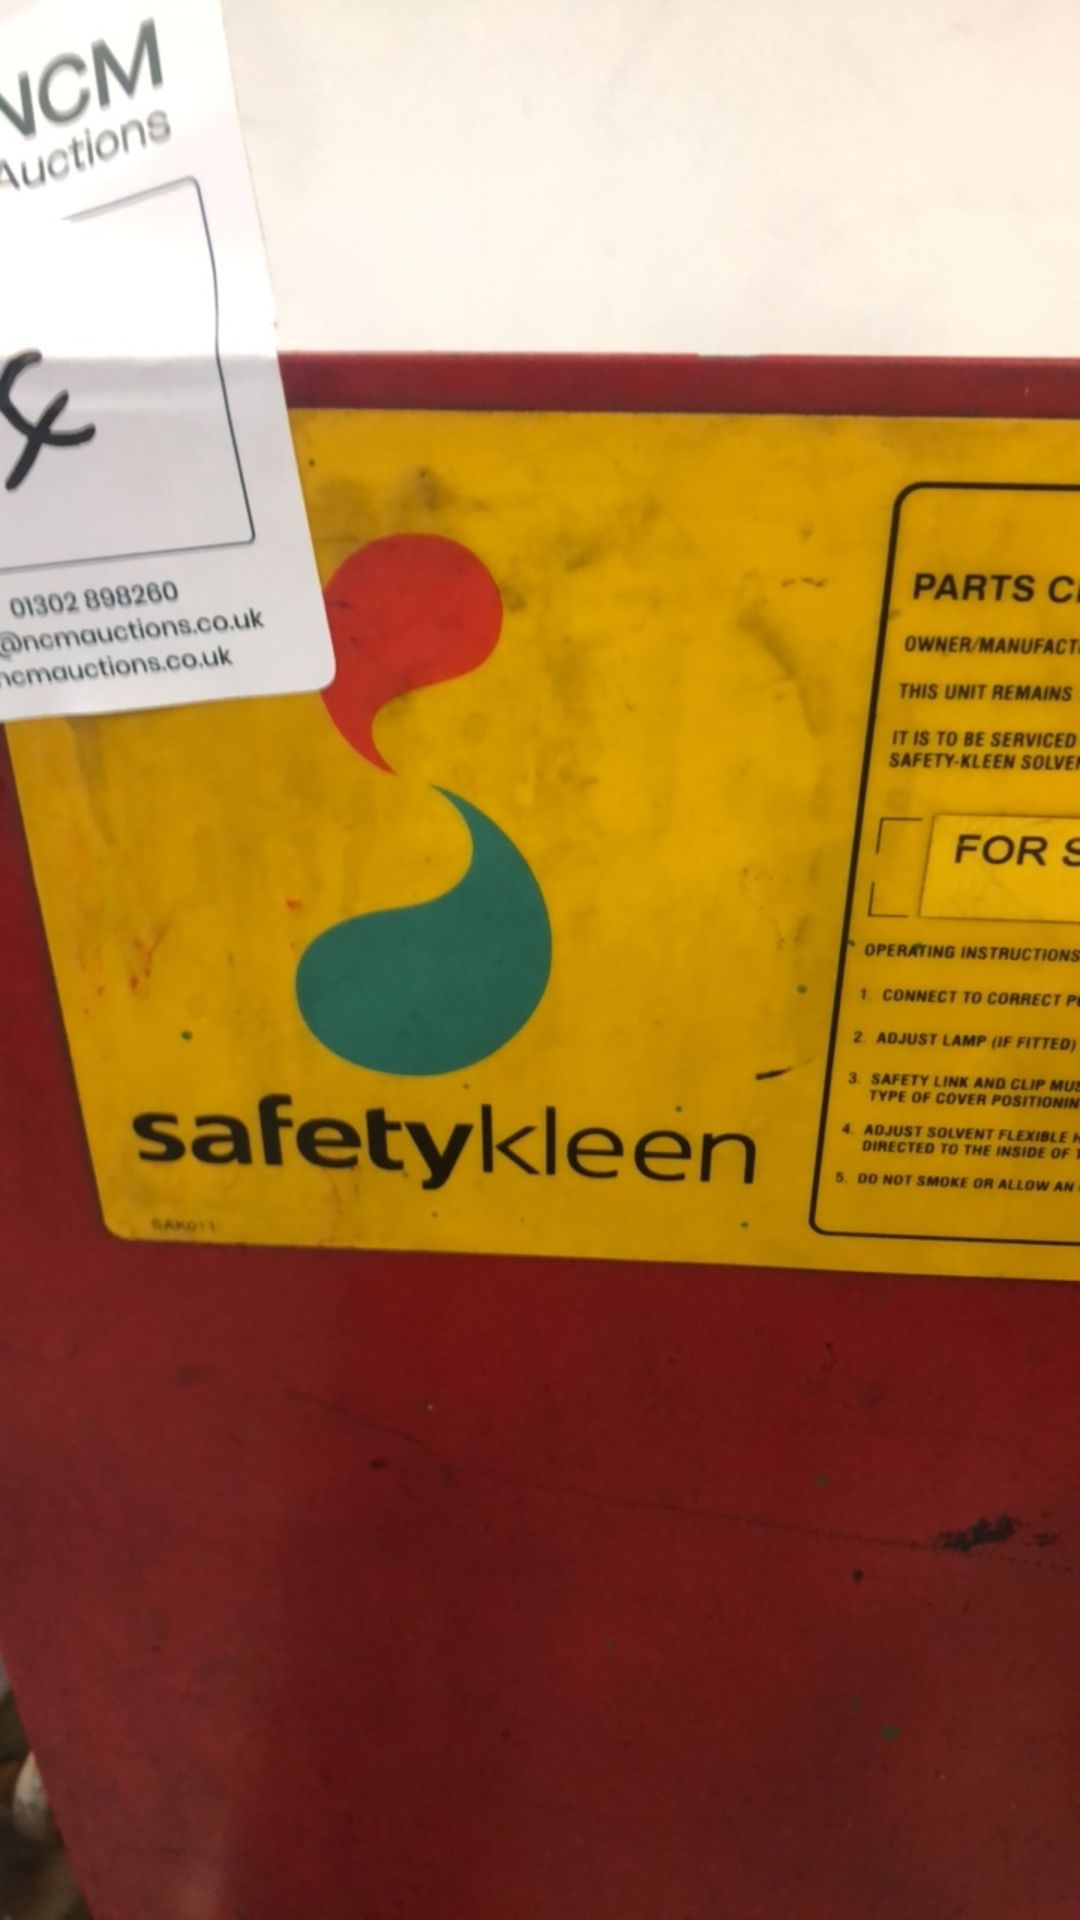 SafetyKleen parts cleaner - Image 5 of 8